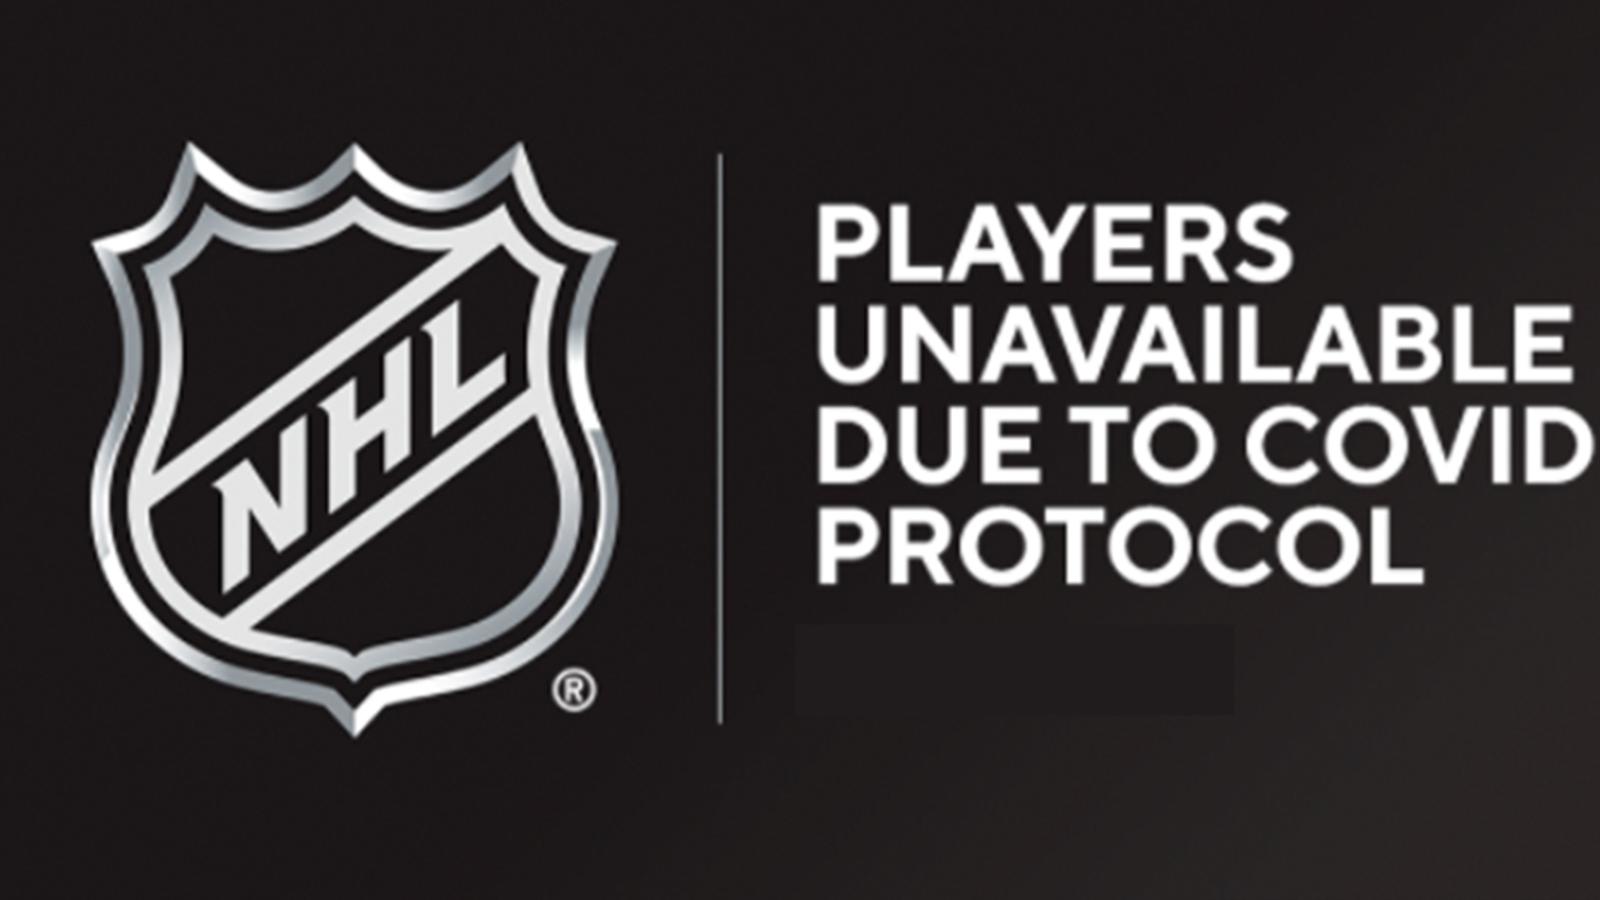 Nine Canucks removed from NHL's protocol list, one Leafs player and Avs goalie Grubauer added